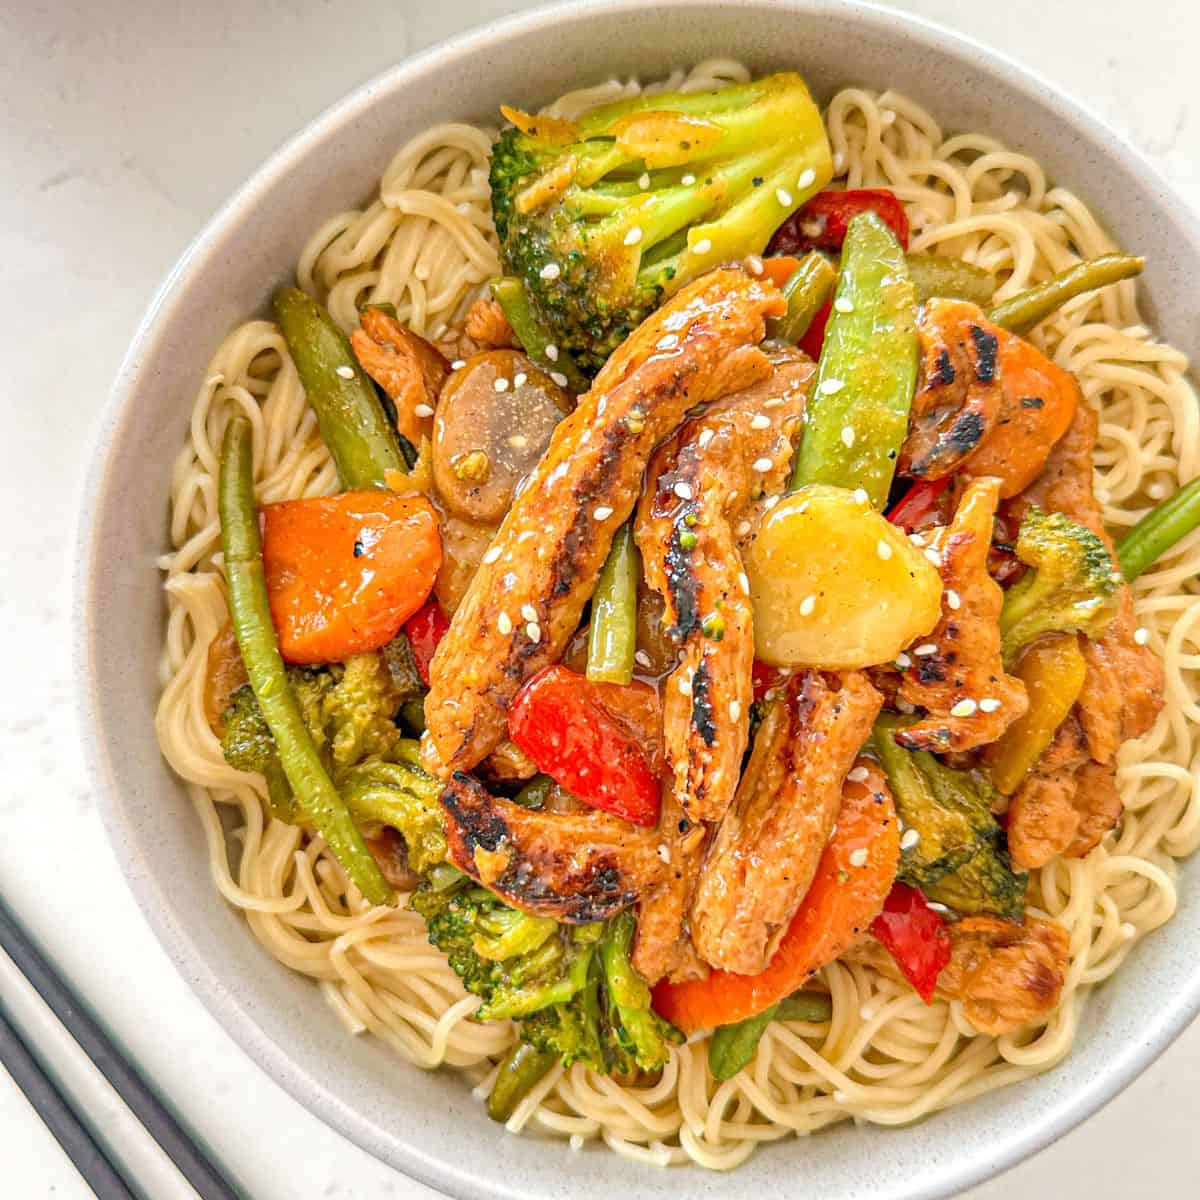 Soy curl stir fry over rice noodles in bowl.